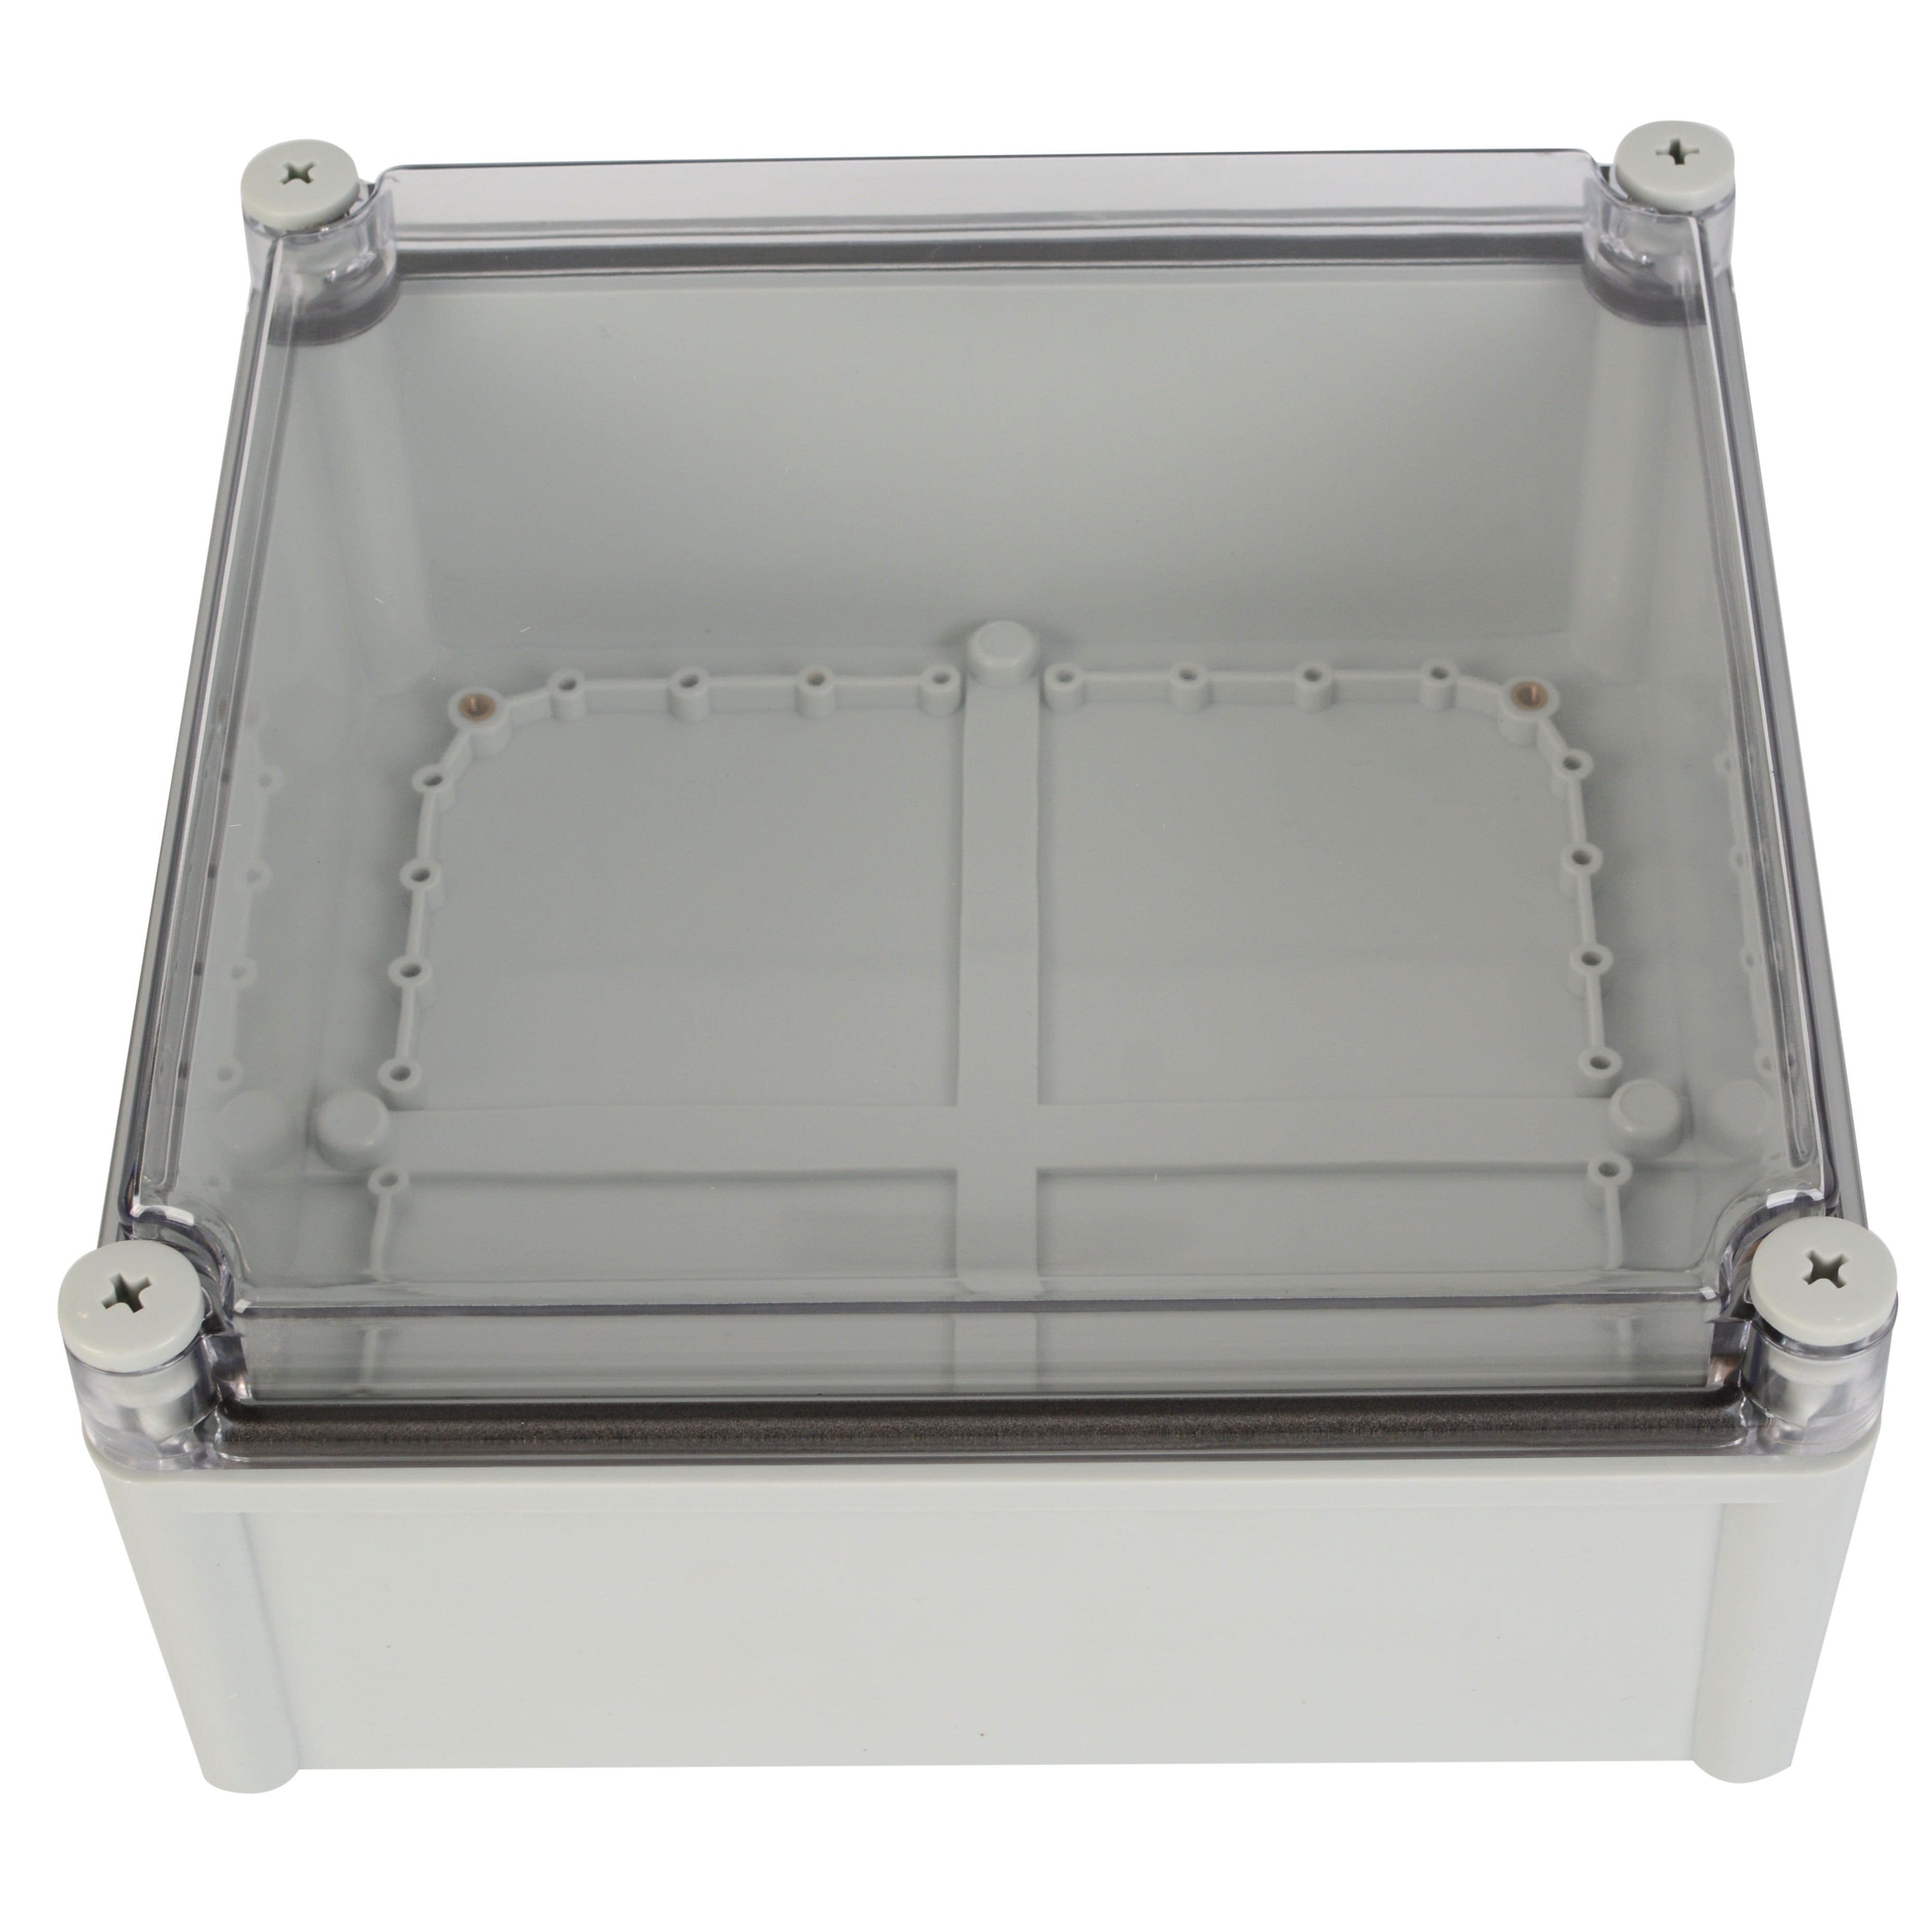 ABS IP66 Clear Lid Junction Box 280 x 280 x 130mm